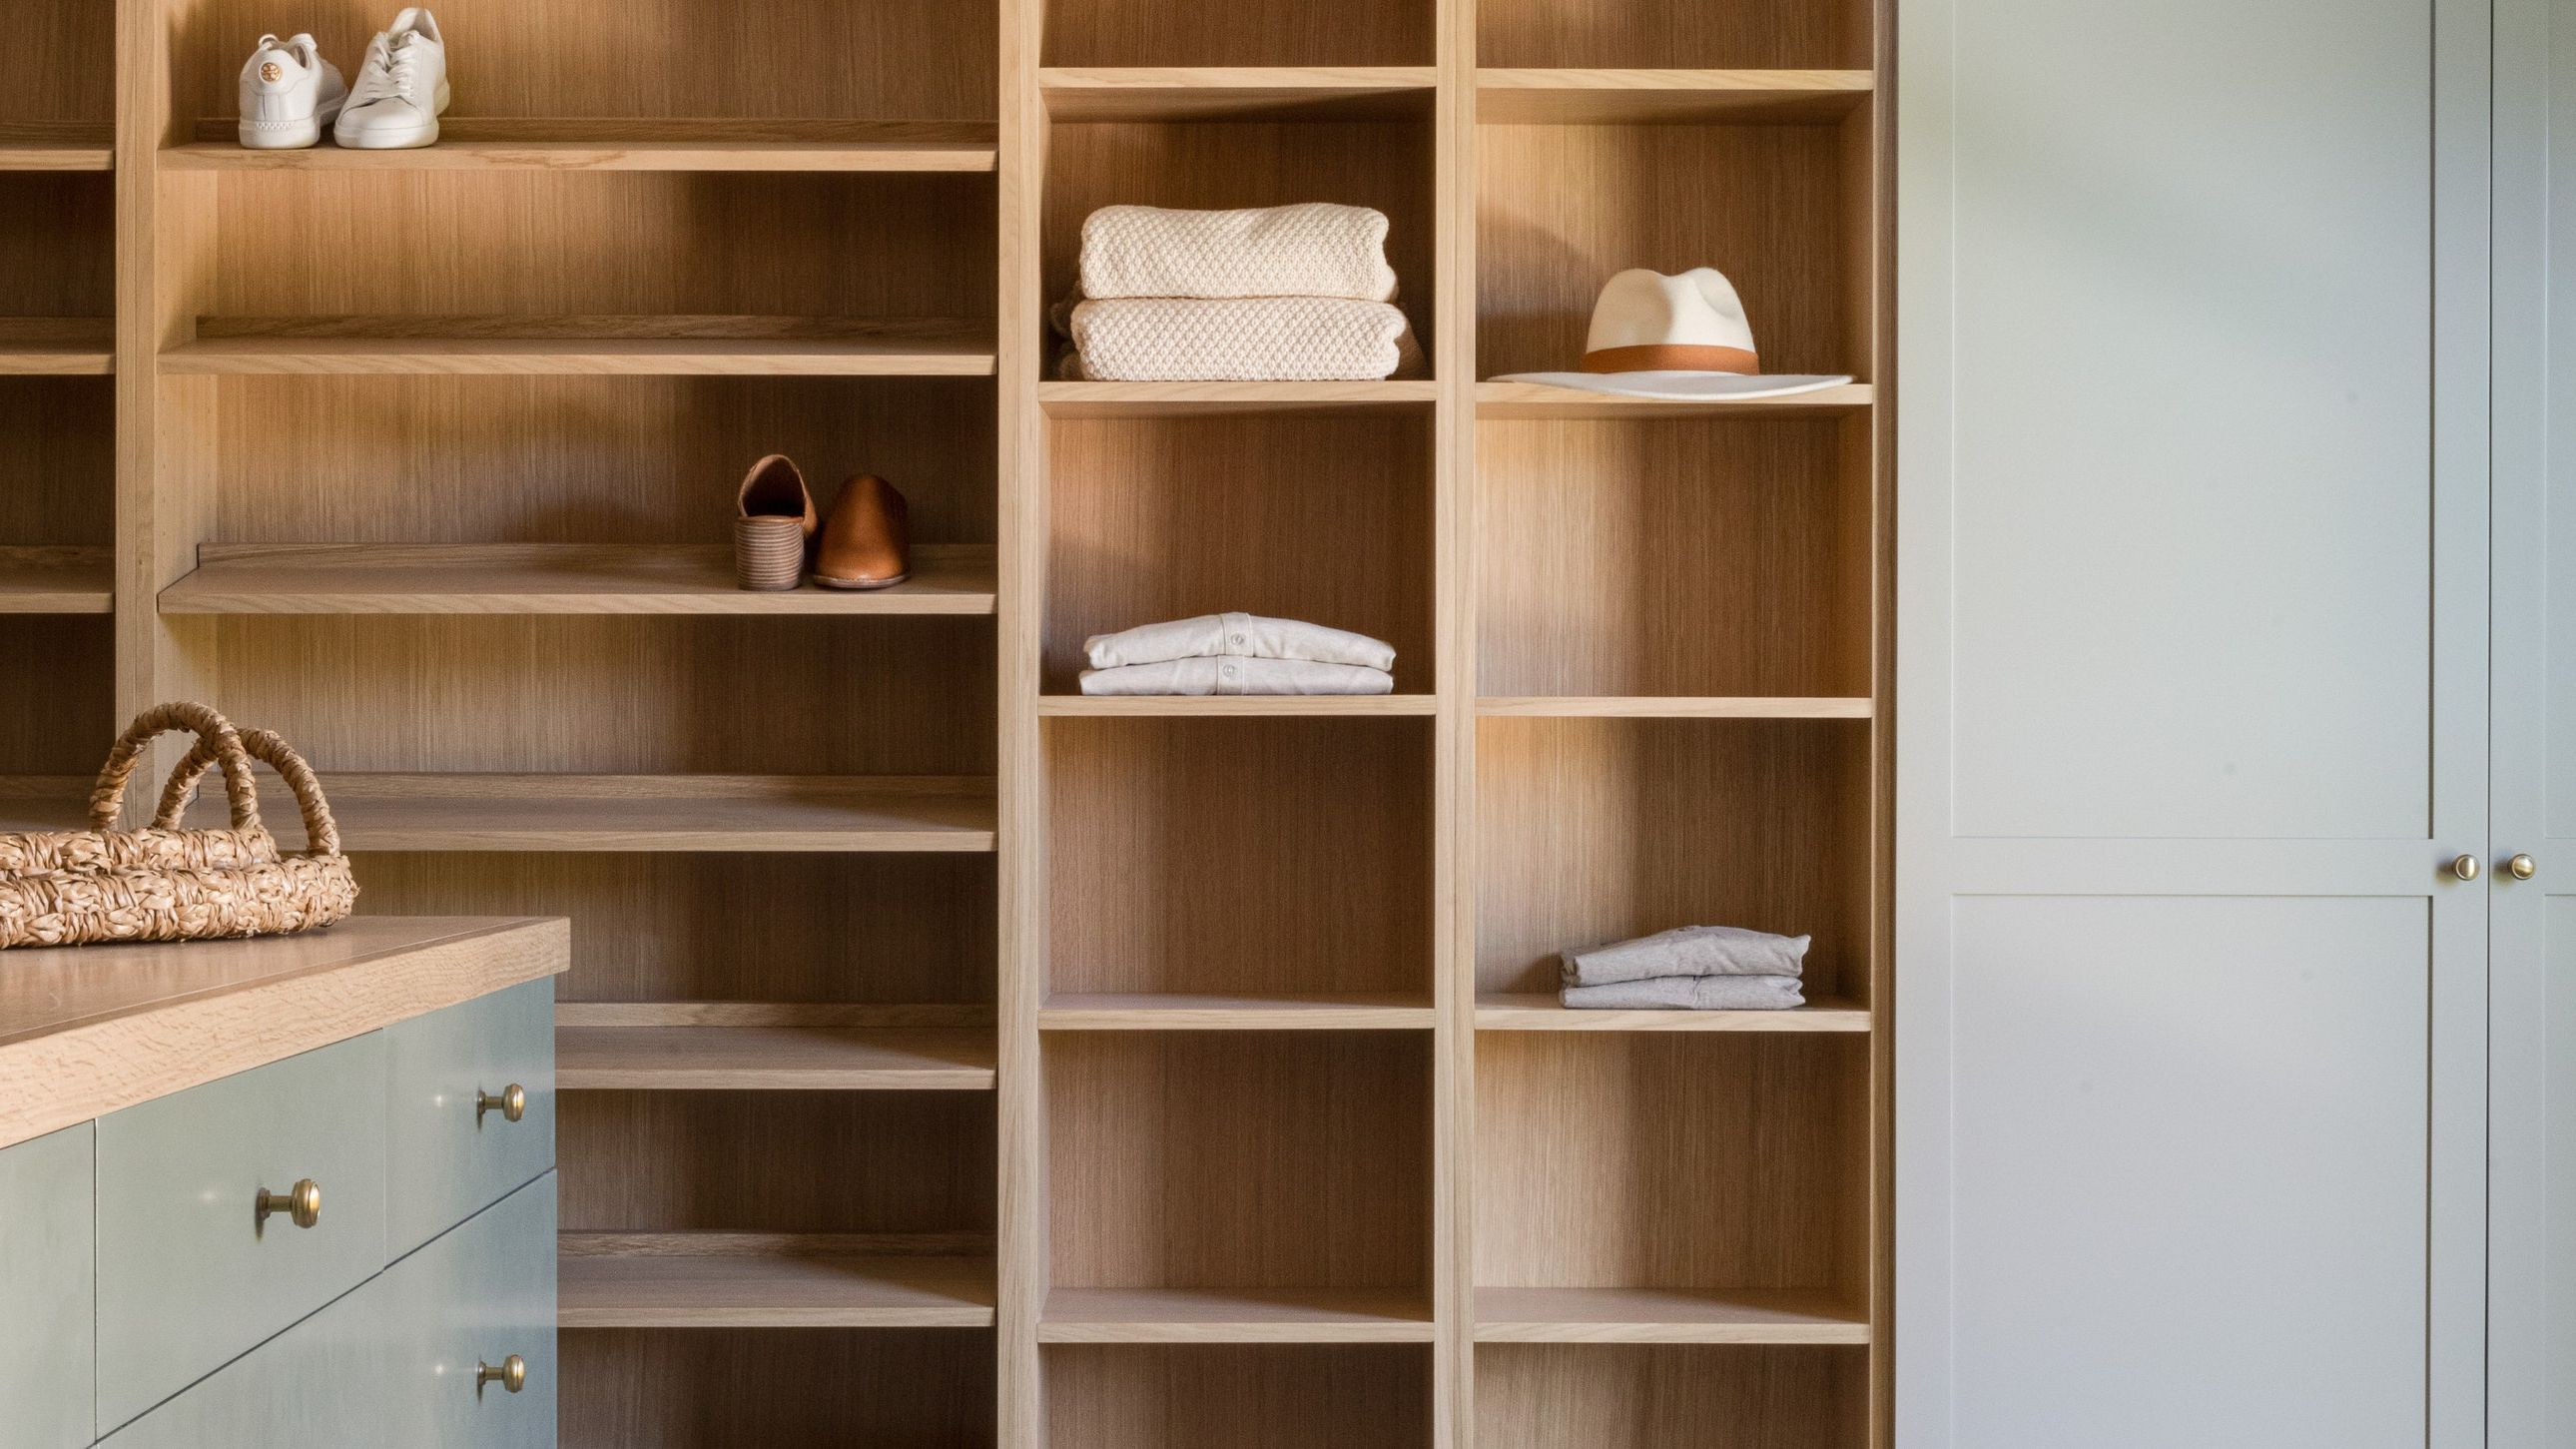 33 Best Closet Organization Ideas To Maximize Space And Style |  Architectural Digest | Architectural Digest Within Double Wardrobes With Drawers And Shelves (Gallery 12 of 20)